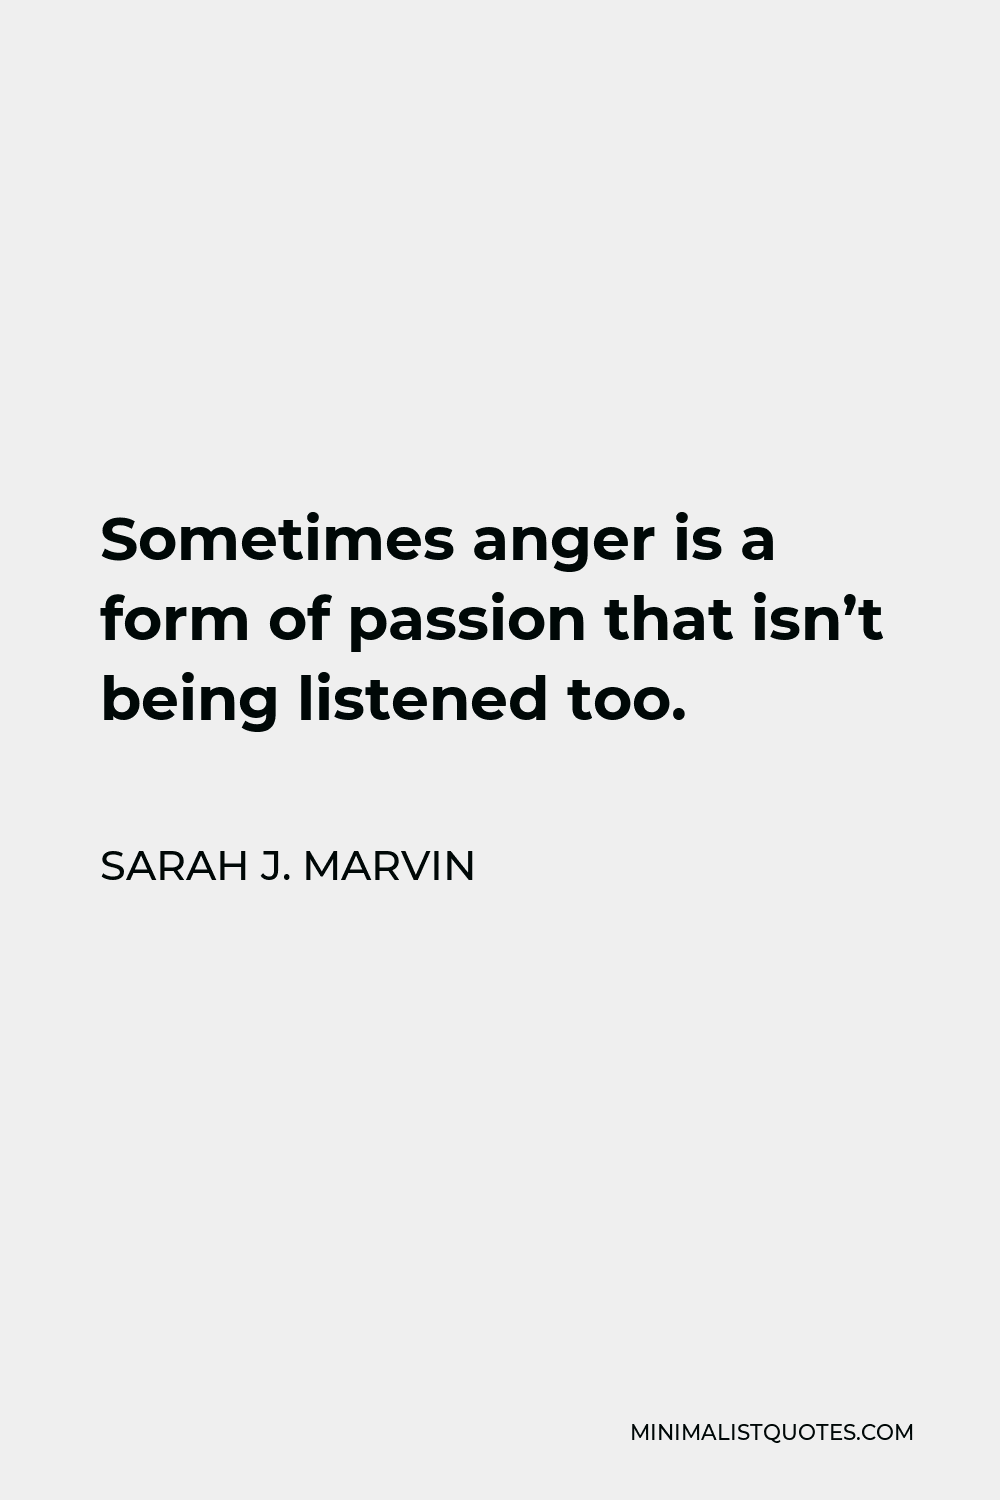 Sarah J. Marvin Quote - Sometimes anger is a form of passion that isn’t being listened too.